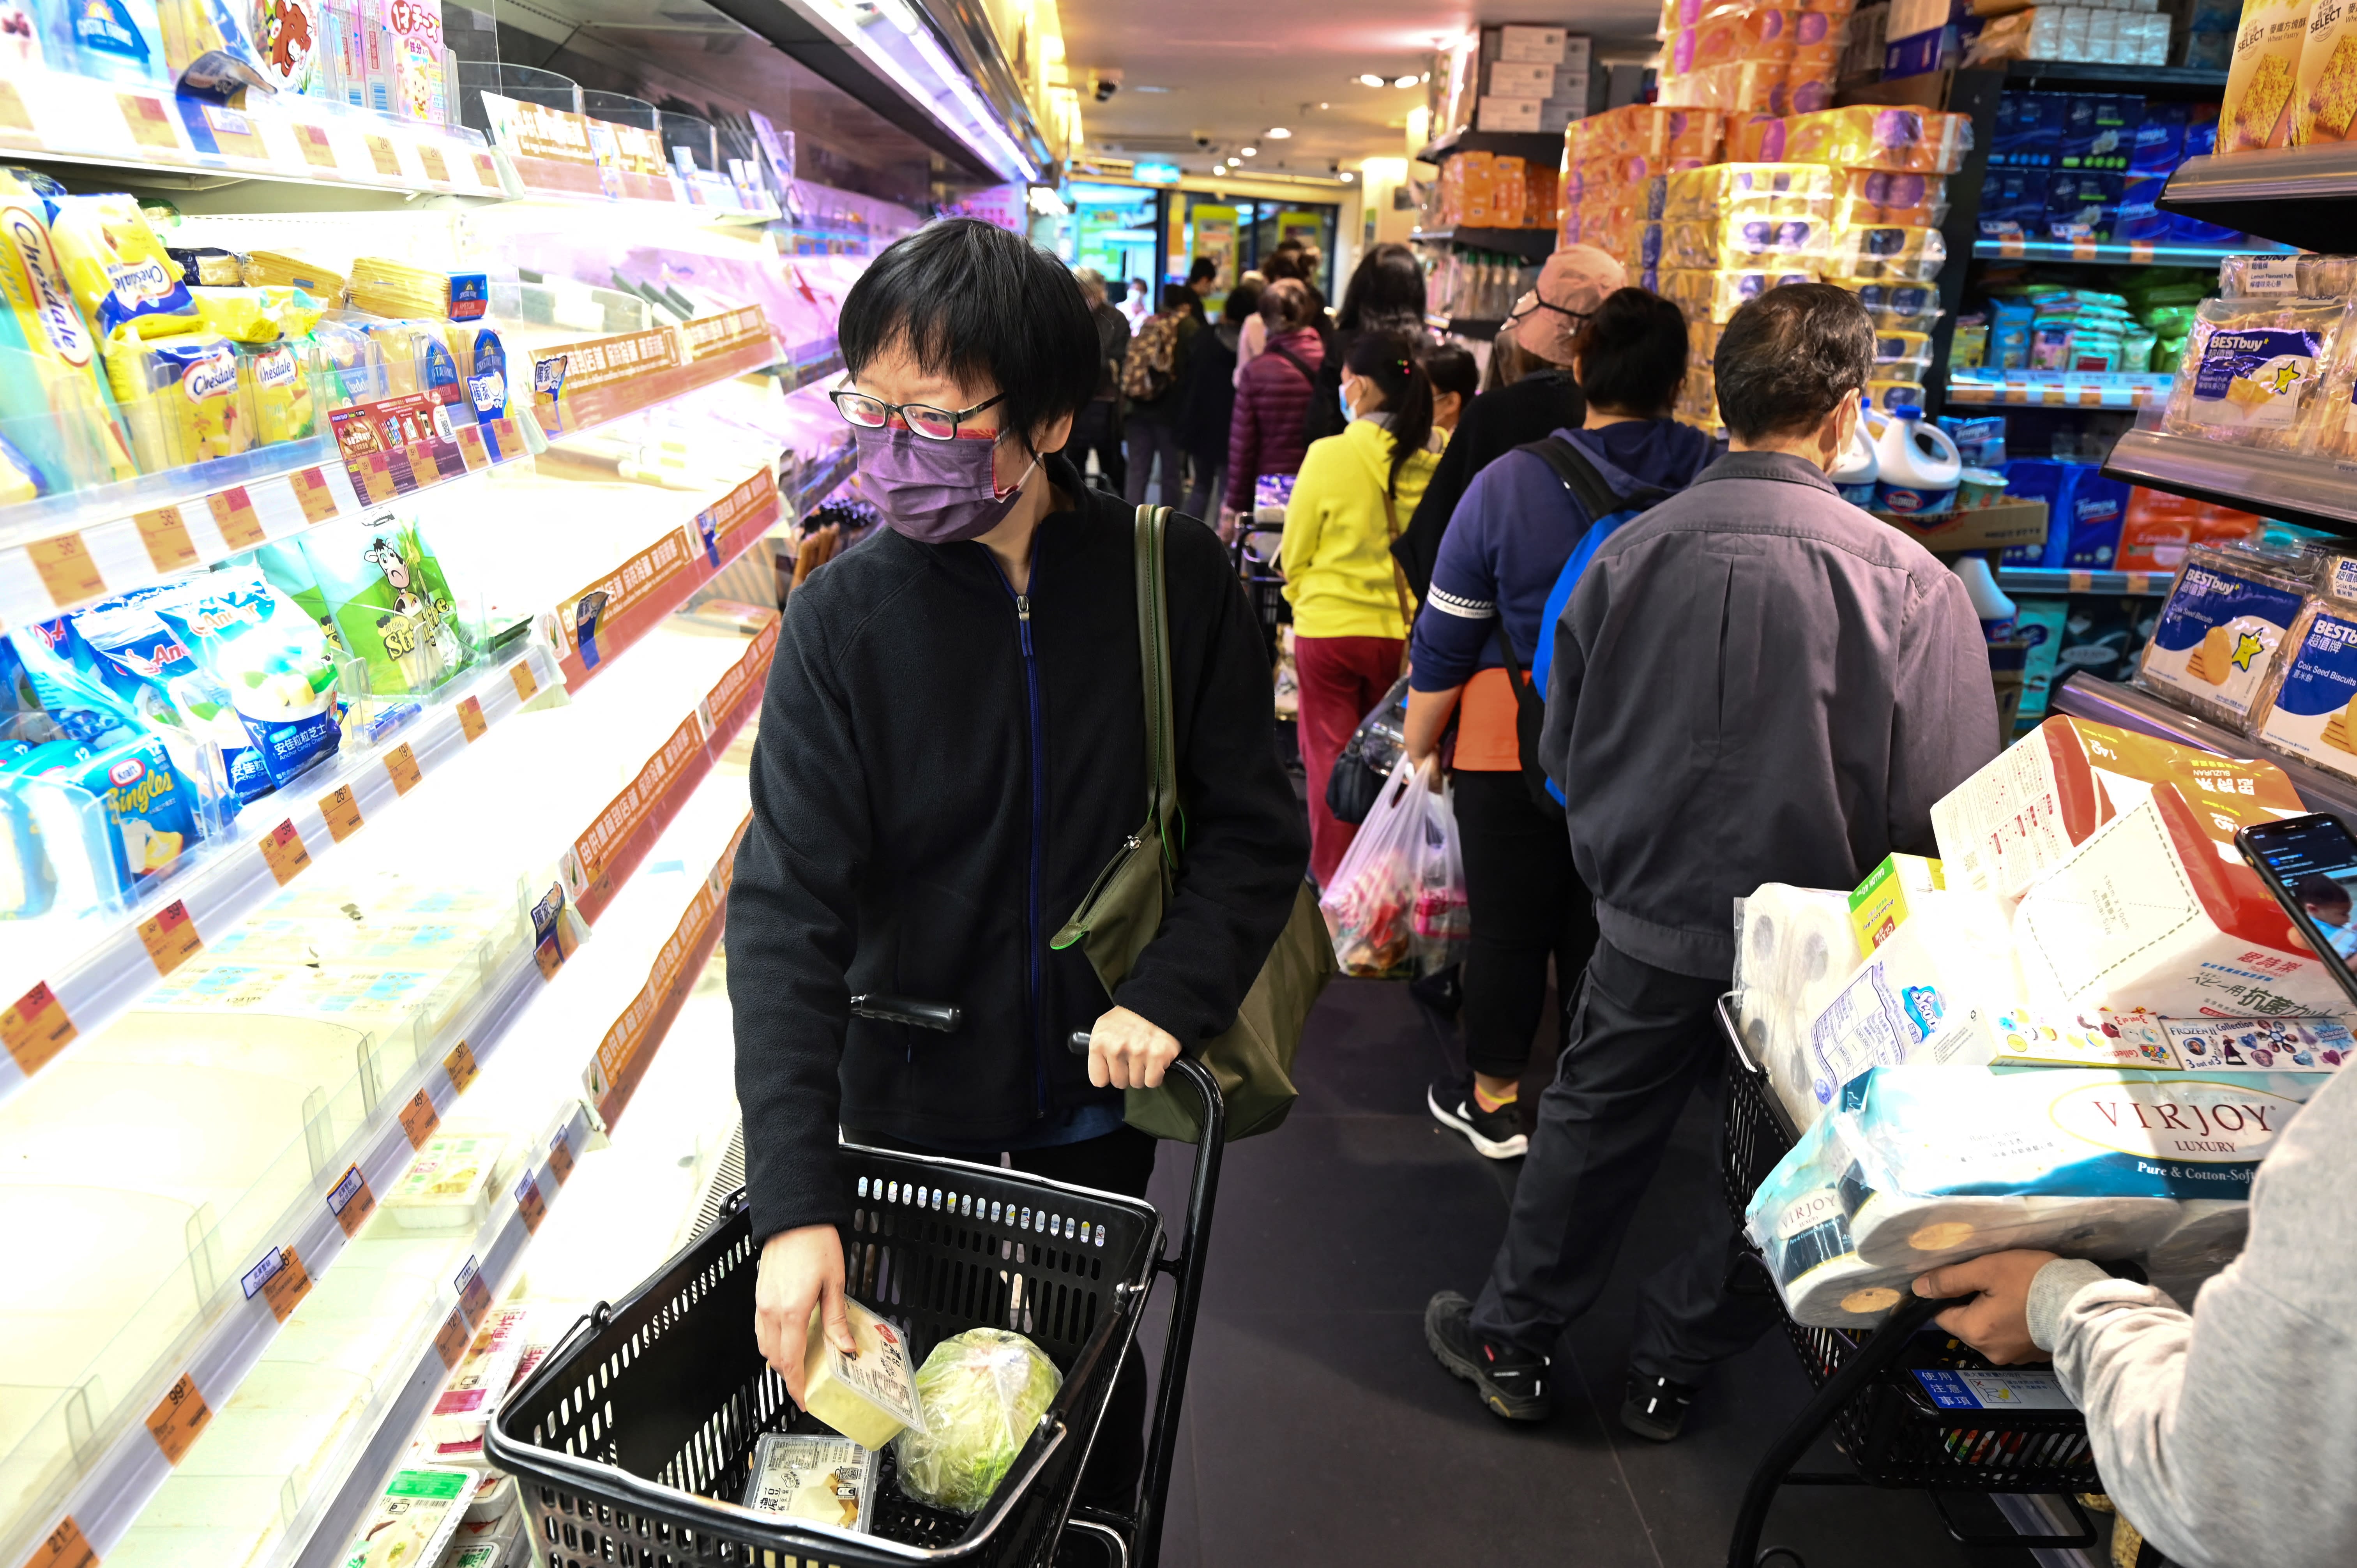 Panic buying returned to the city this week with many supermarket shelves stripped bare following mixed messaging from the government over whether it plans a city lockdown later this month when it tests all residents.